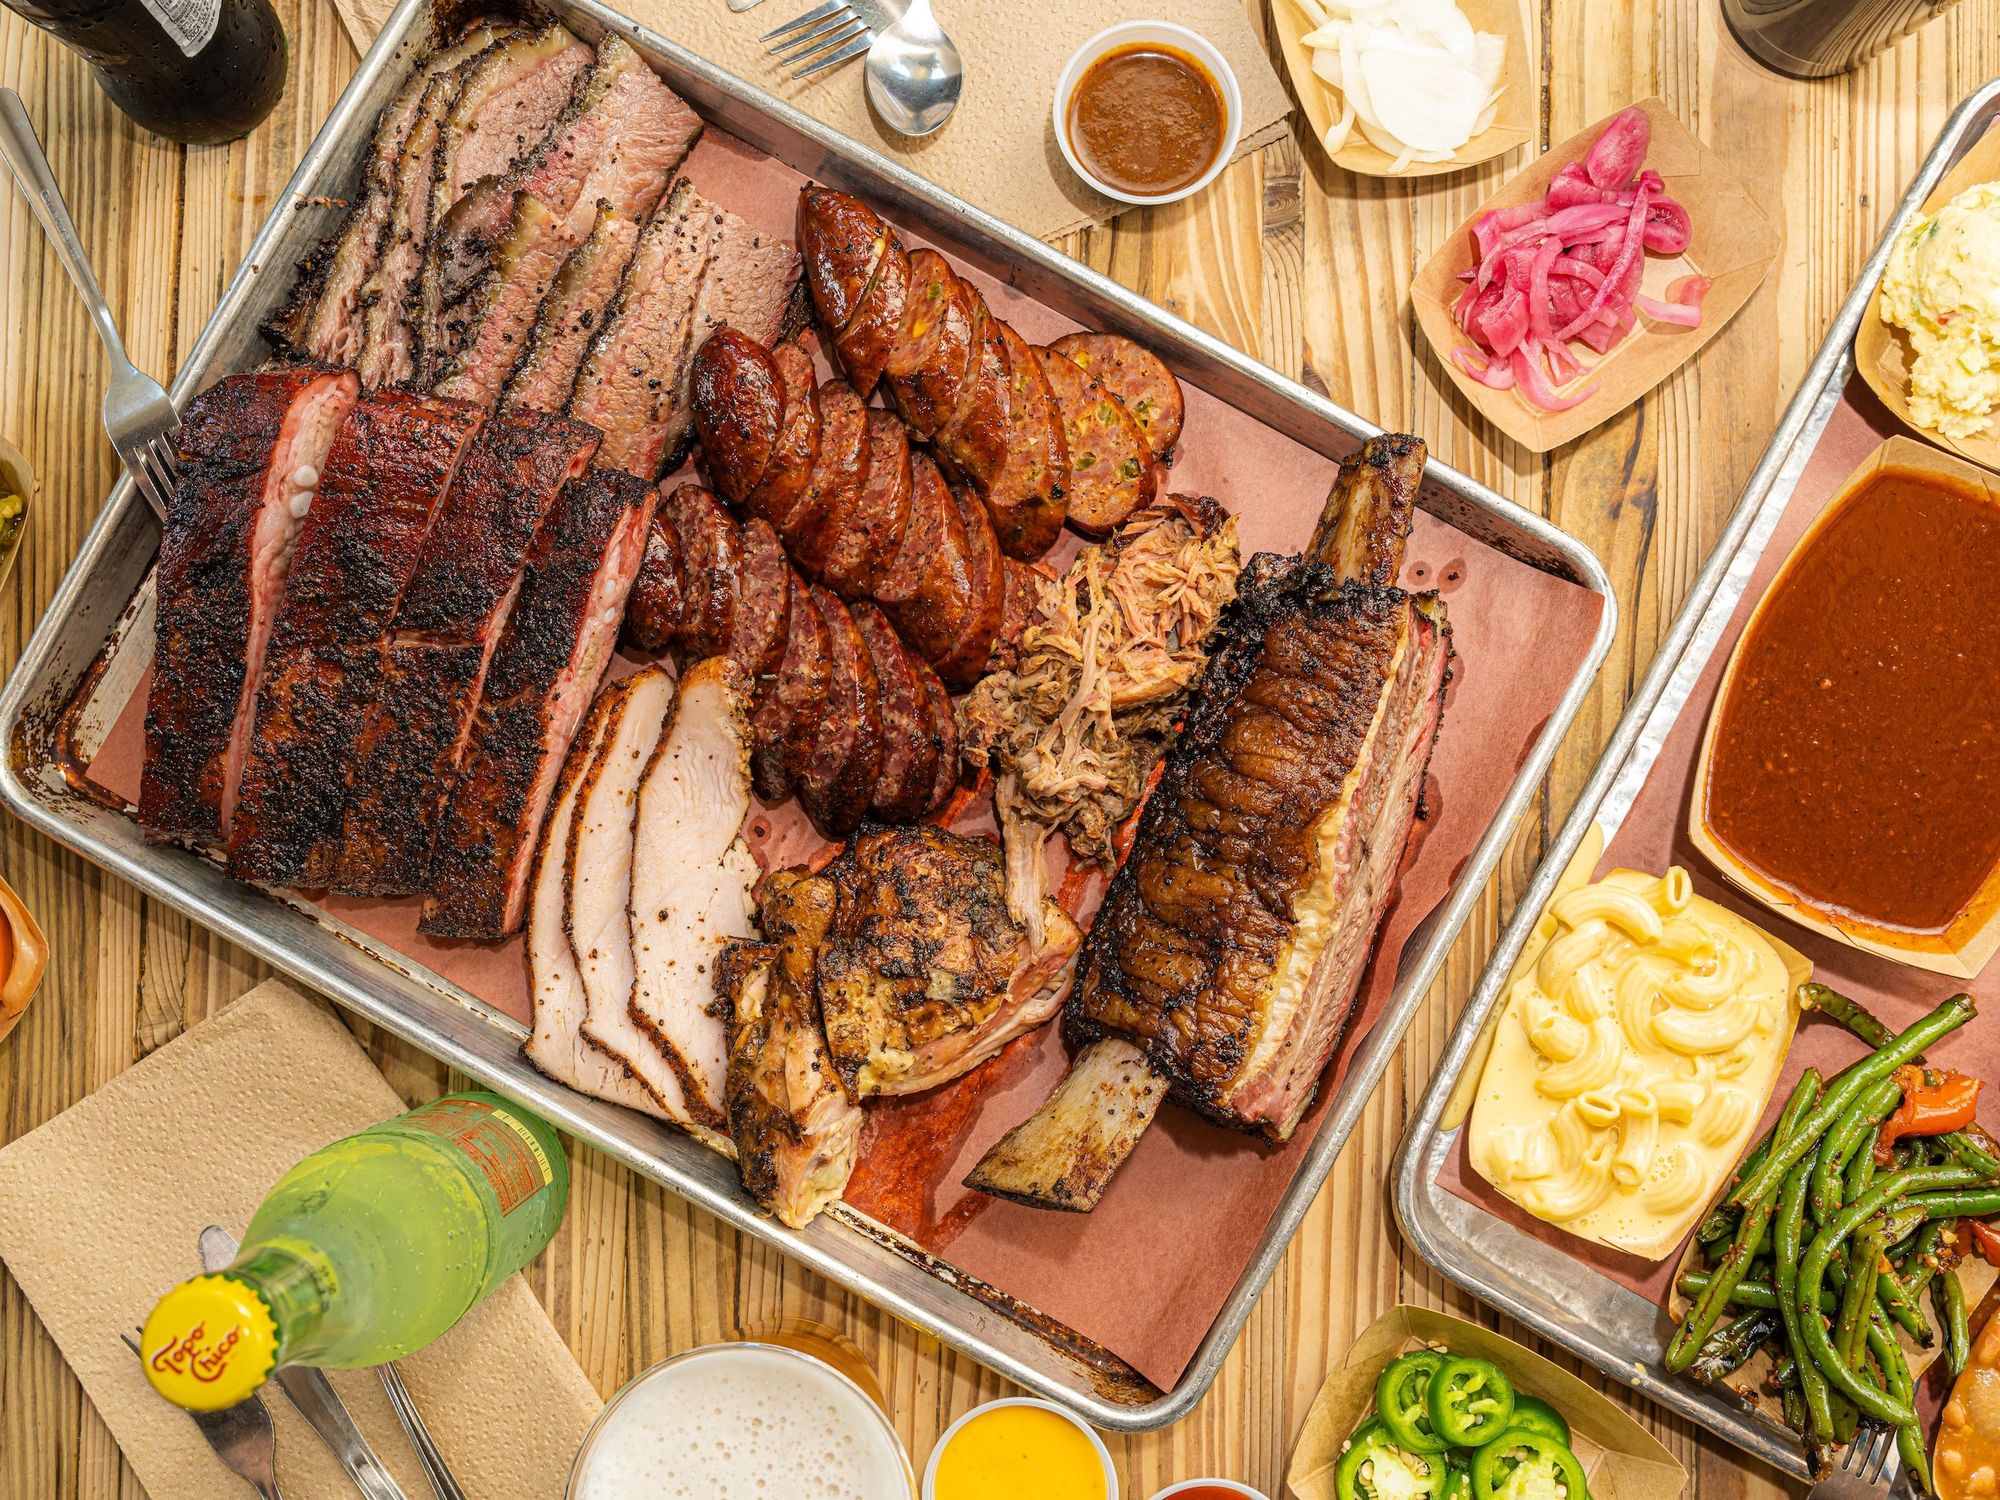 The Pit Room barbecue spread